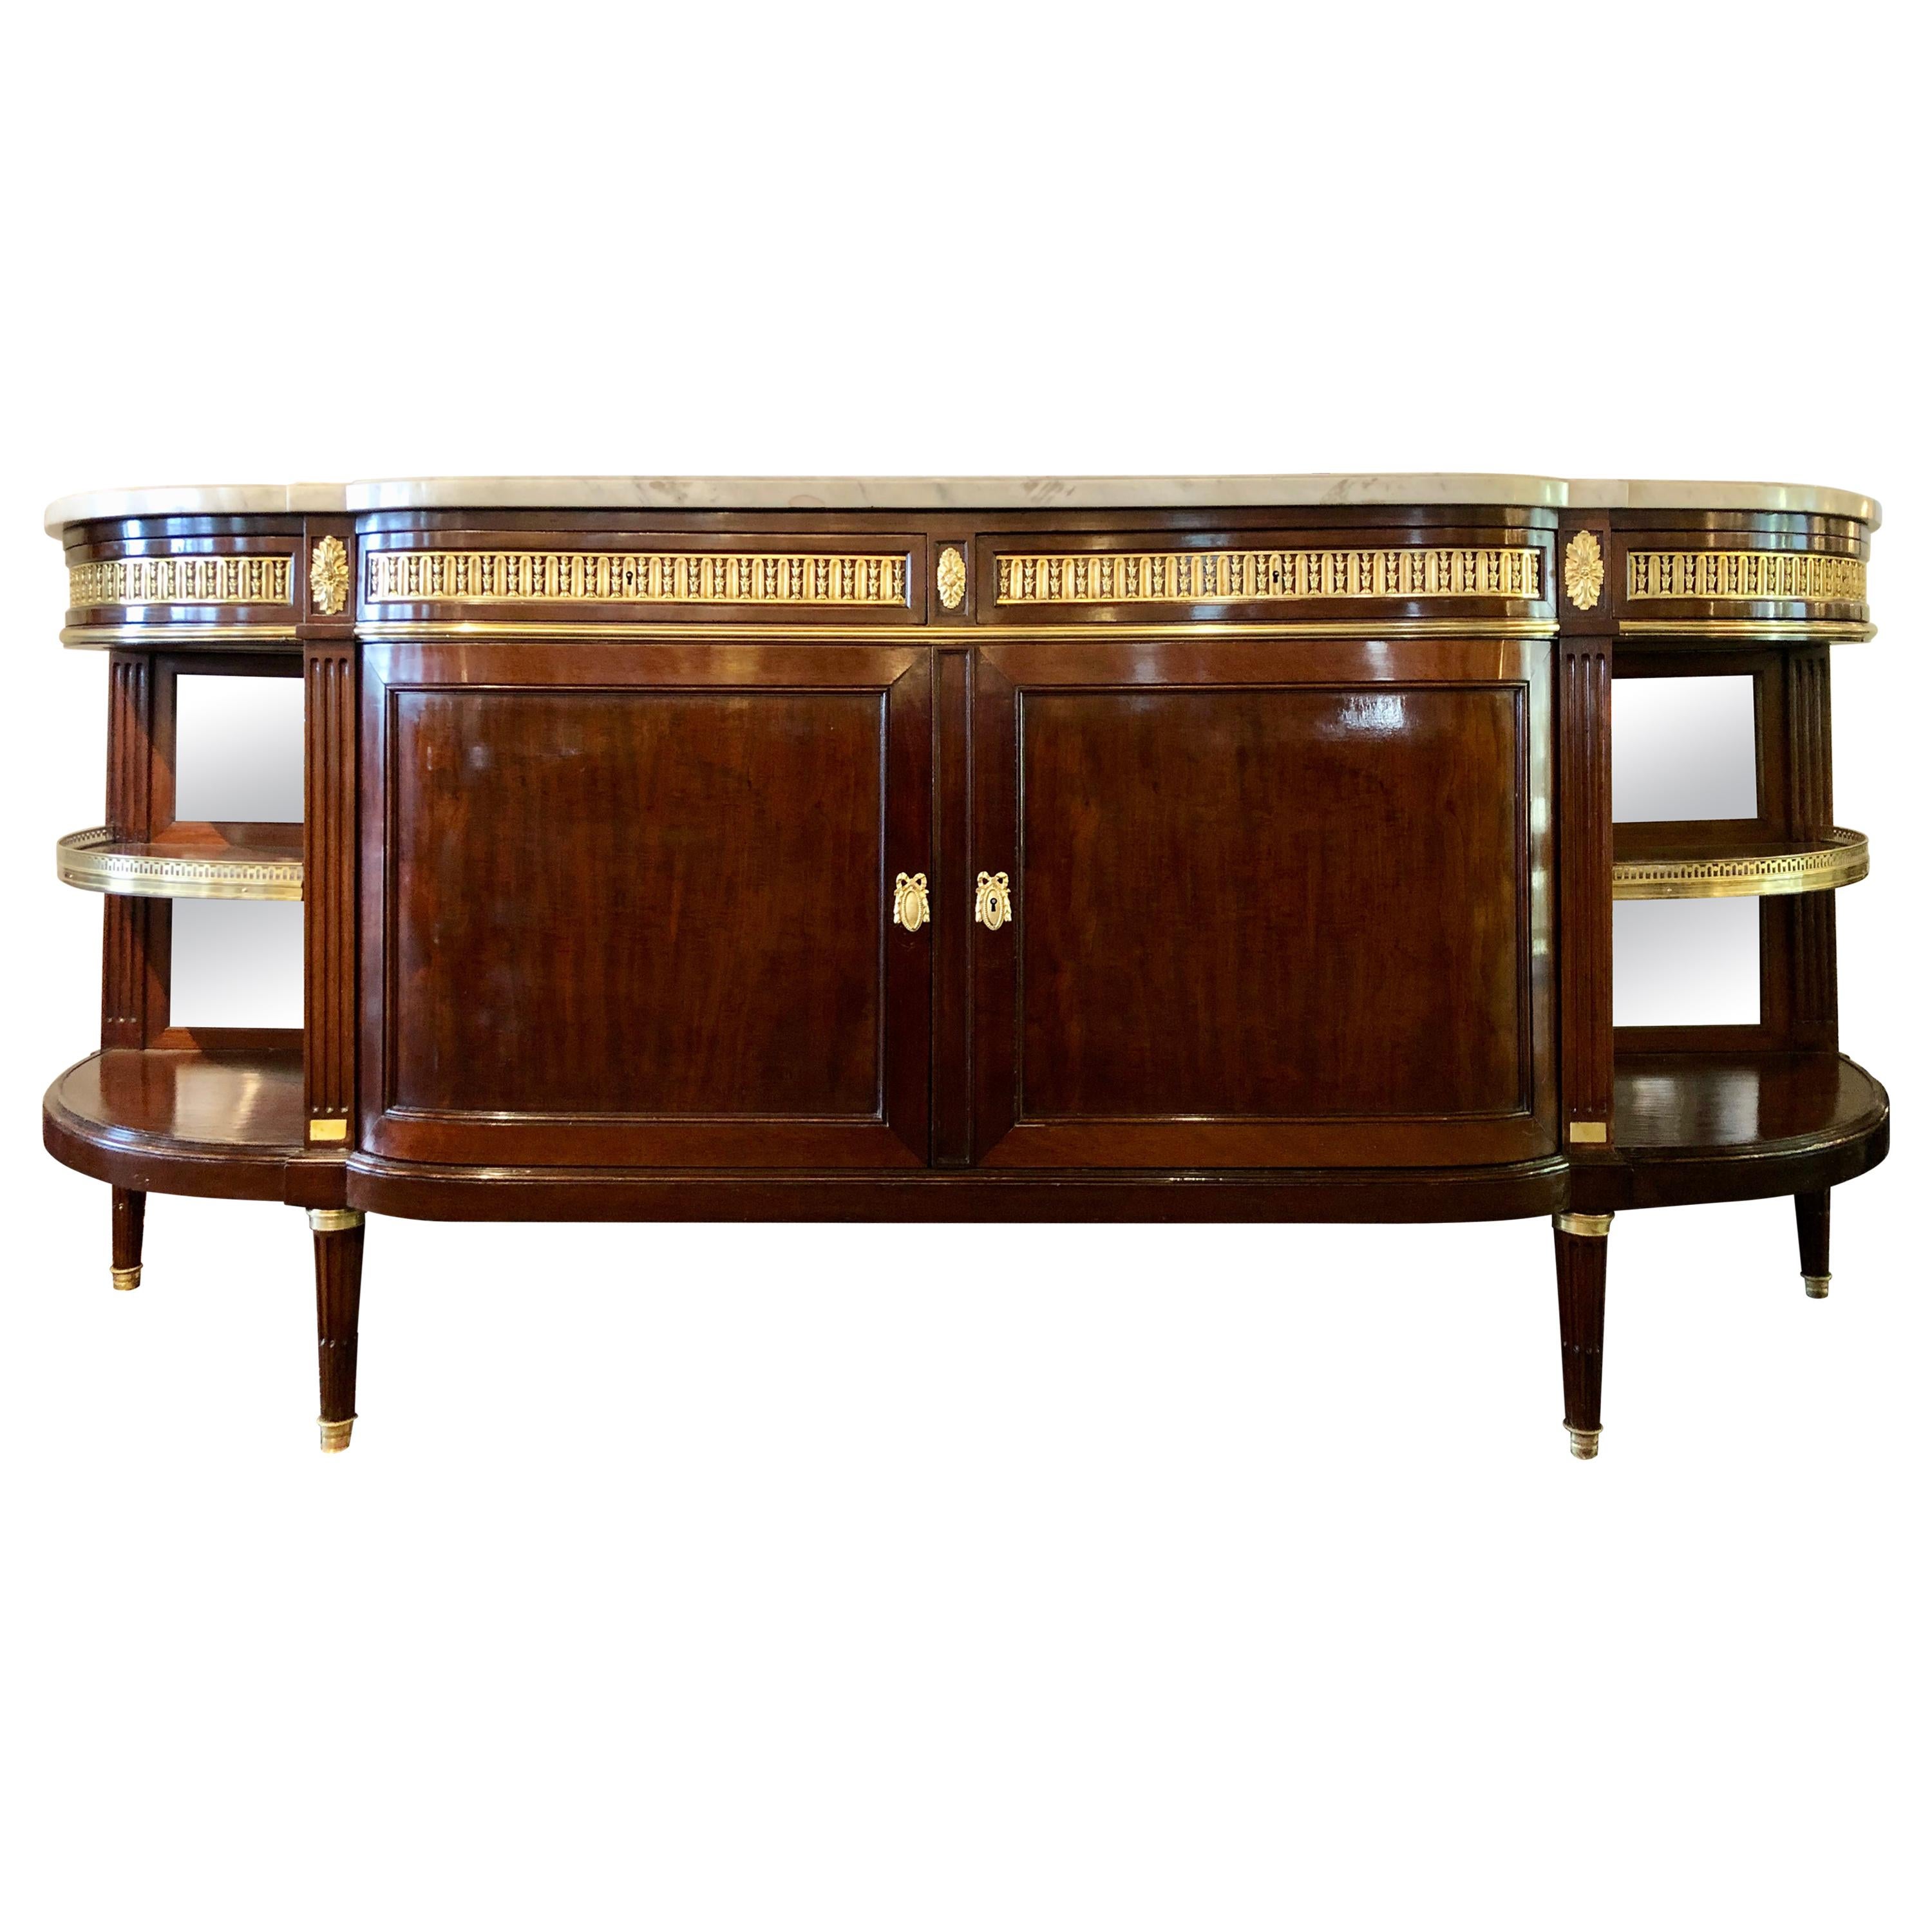 19th Century Louis XVI Sideboard, Cabinet or Console by Maison Forest, Mahogany